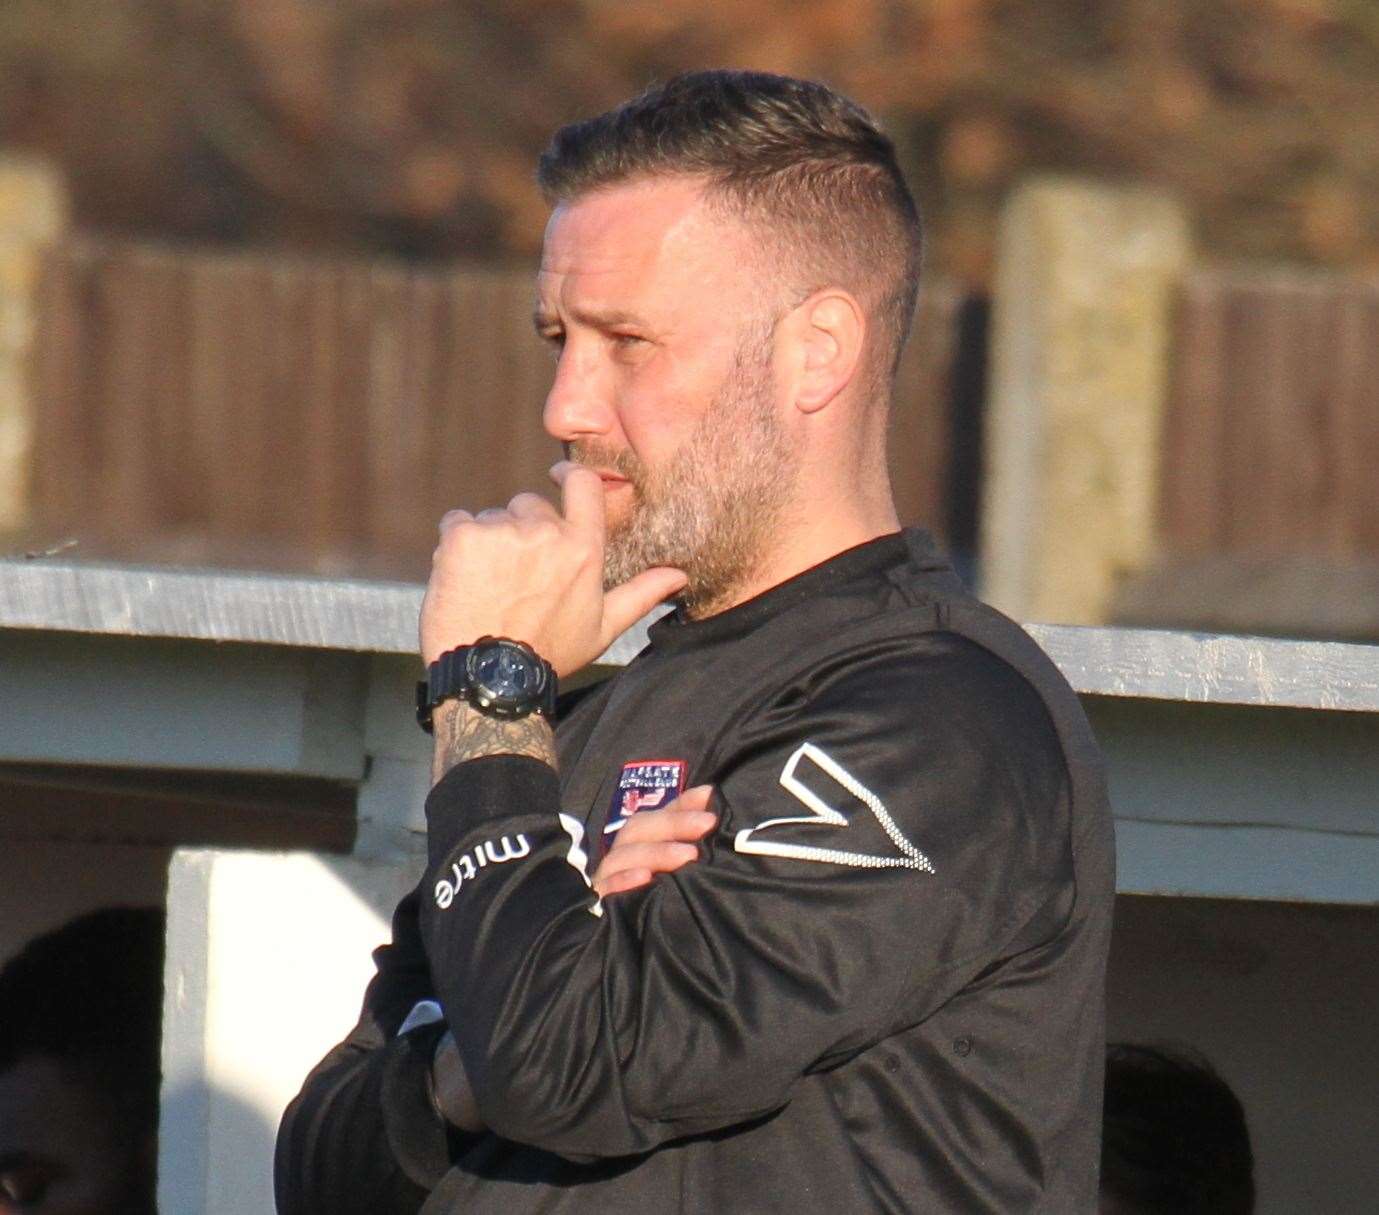 Margate manager Jay Saunders Picture: Don Walker